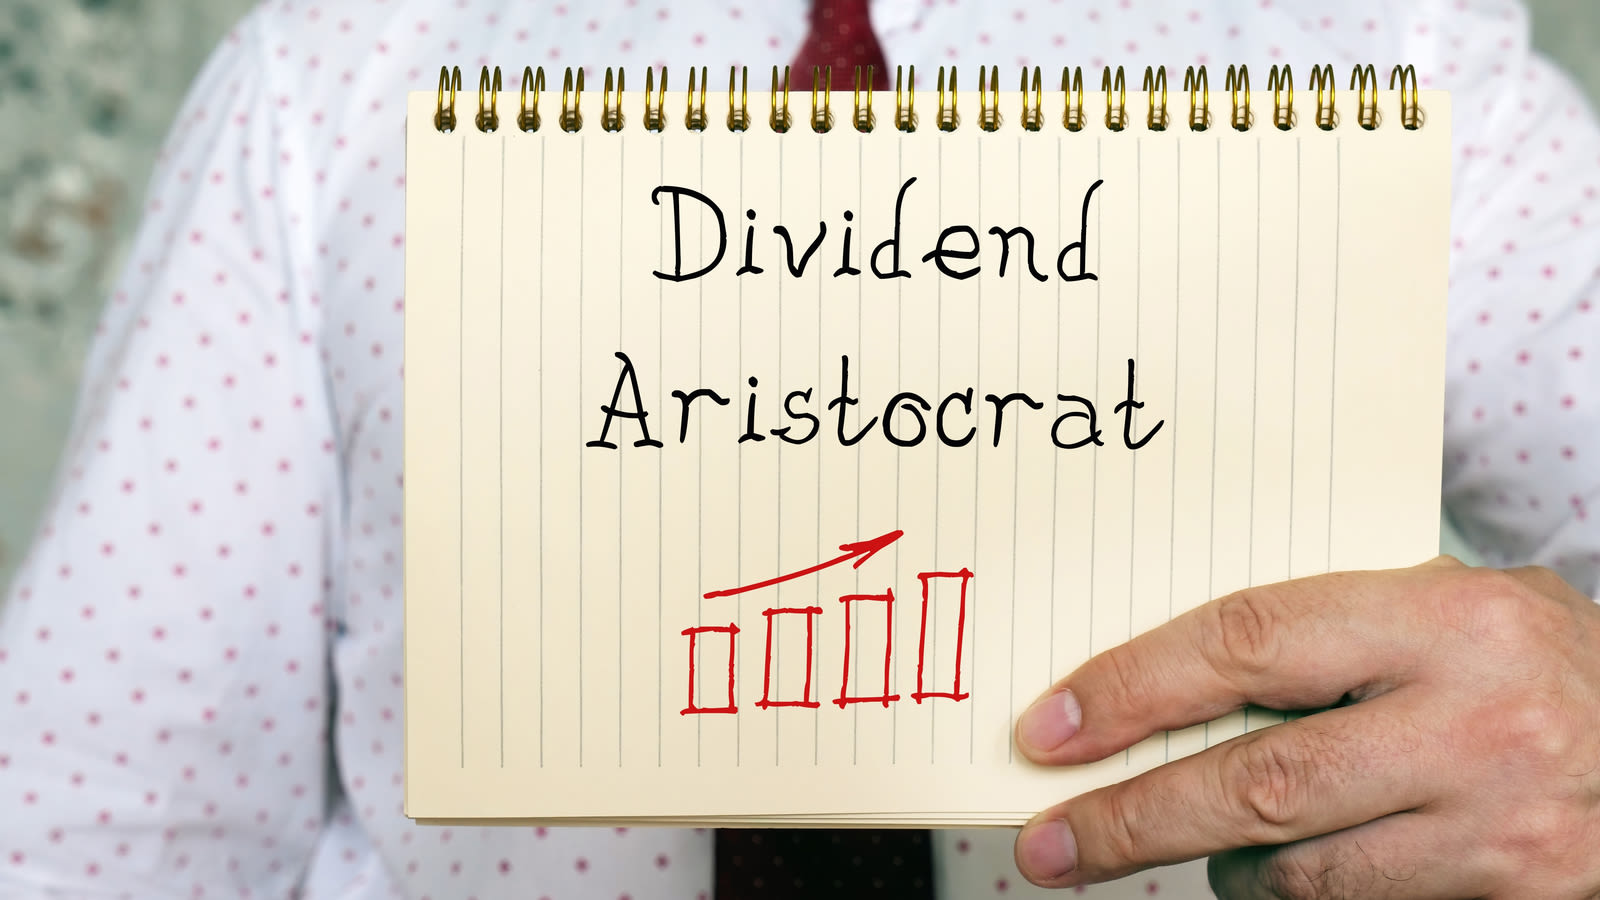 Income Investors! Lock In These 3 Dividend Aristocrat Stocks Now